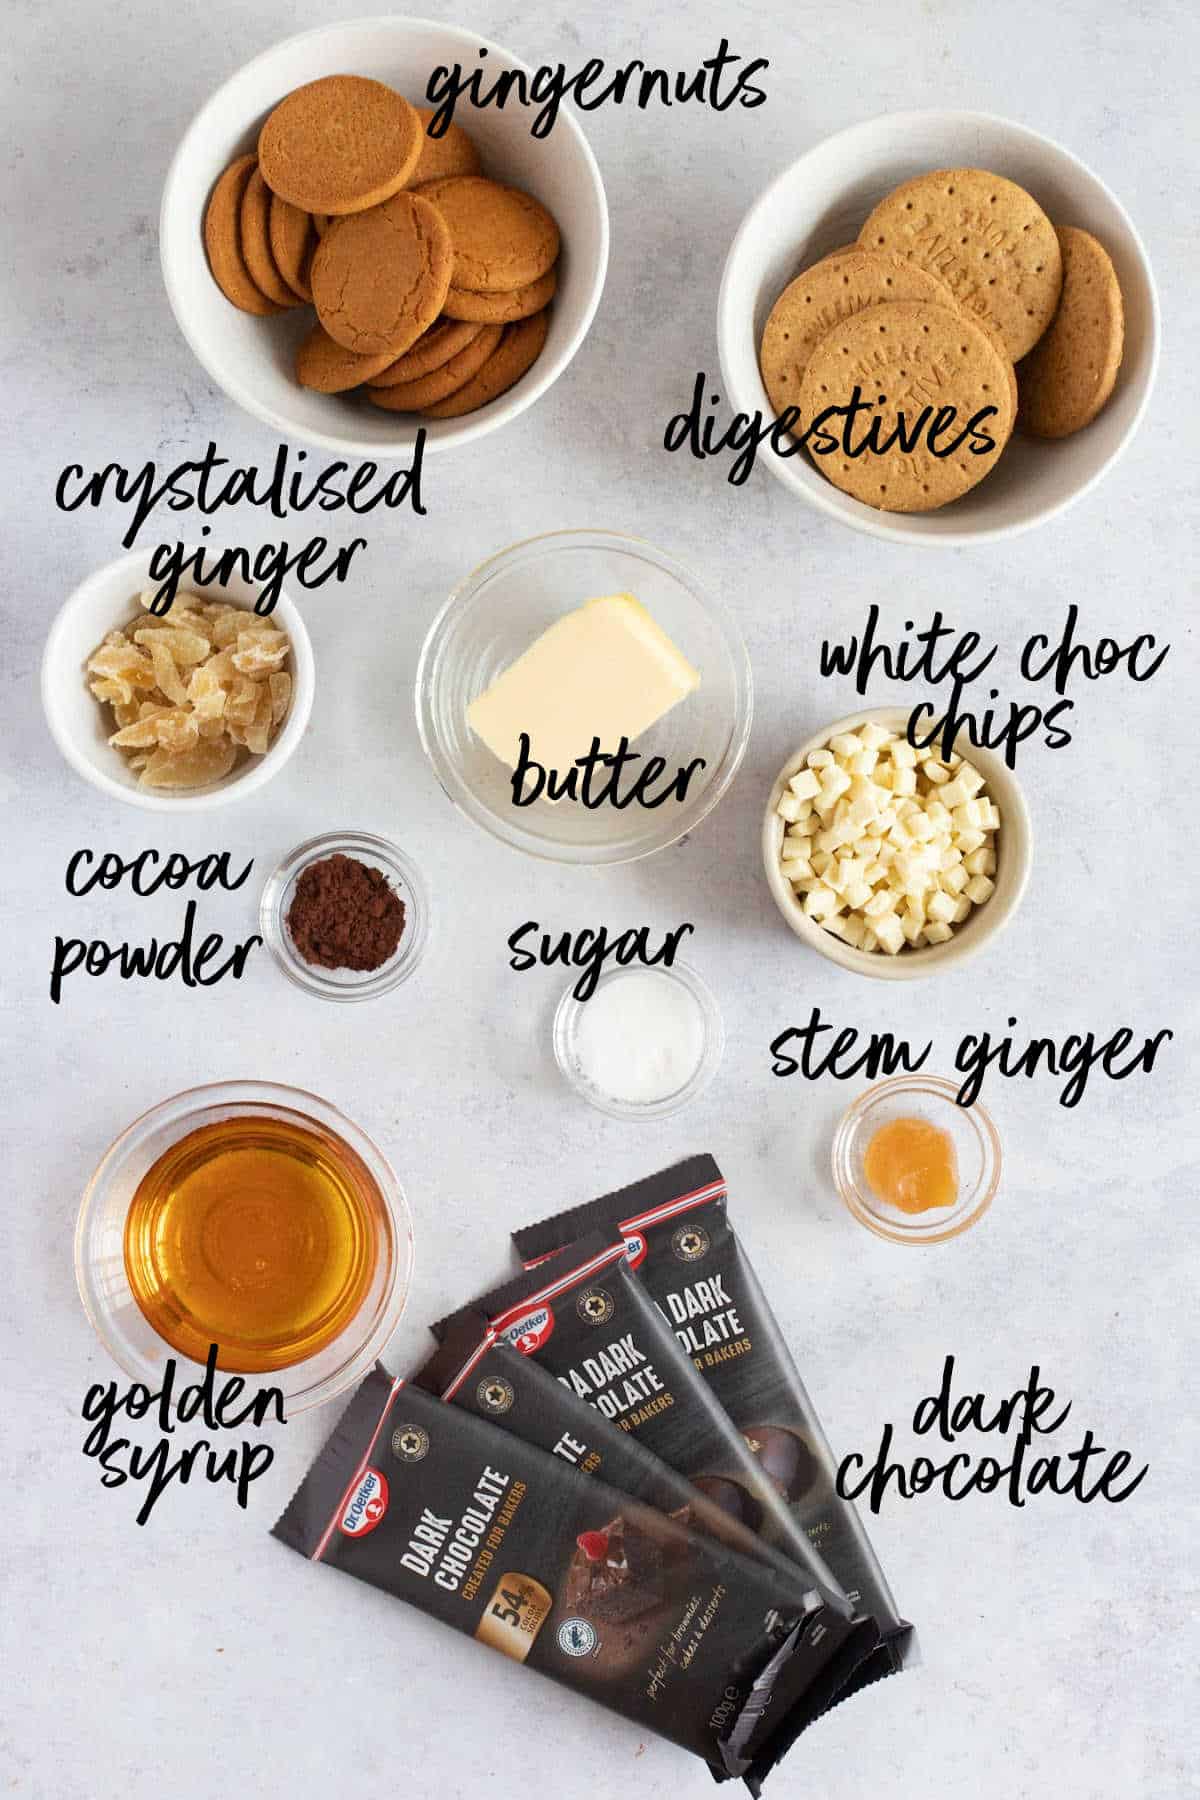 Ingredients for dark chocolate tiffin with ginger.